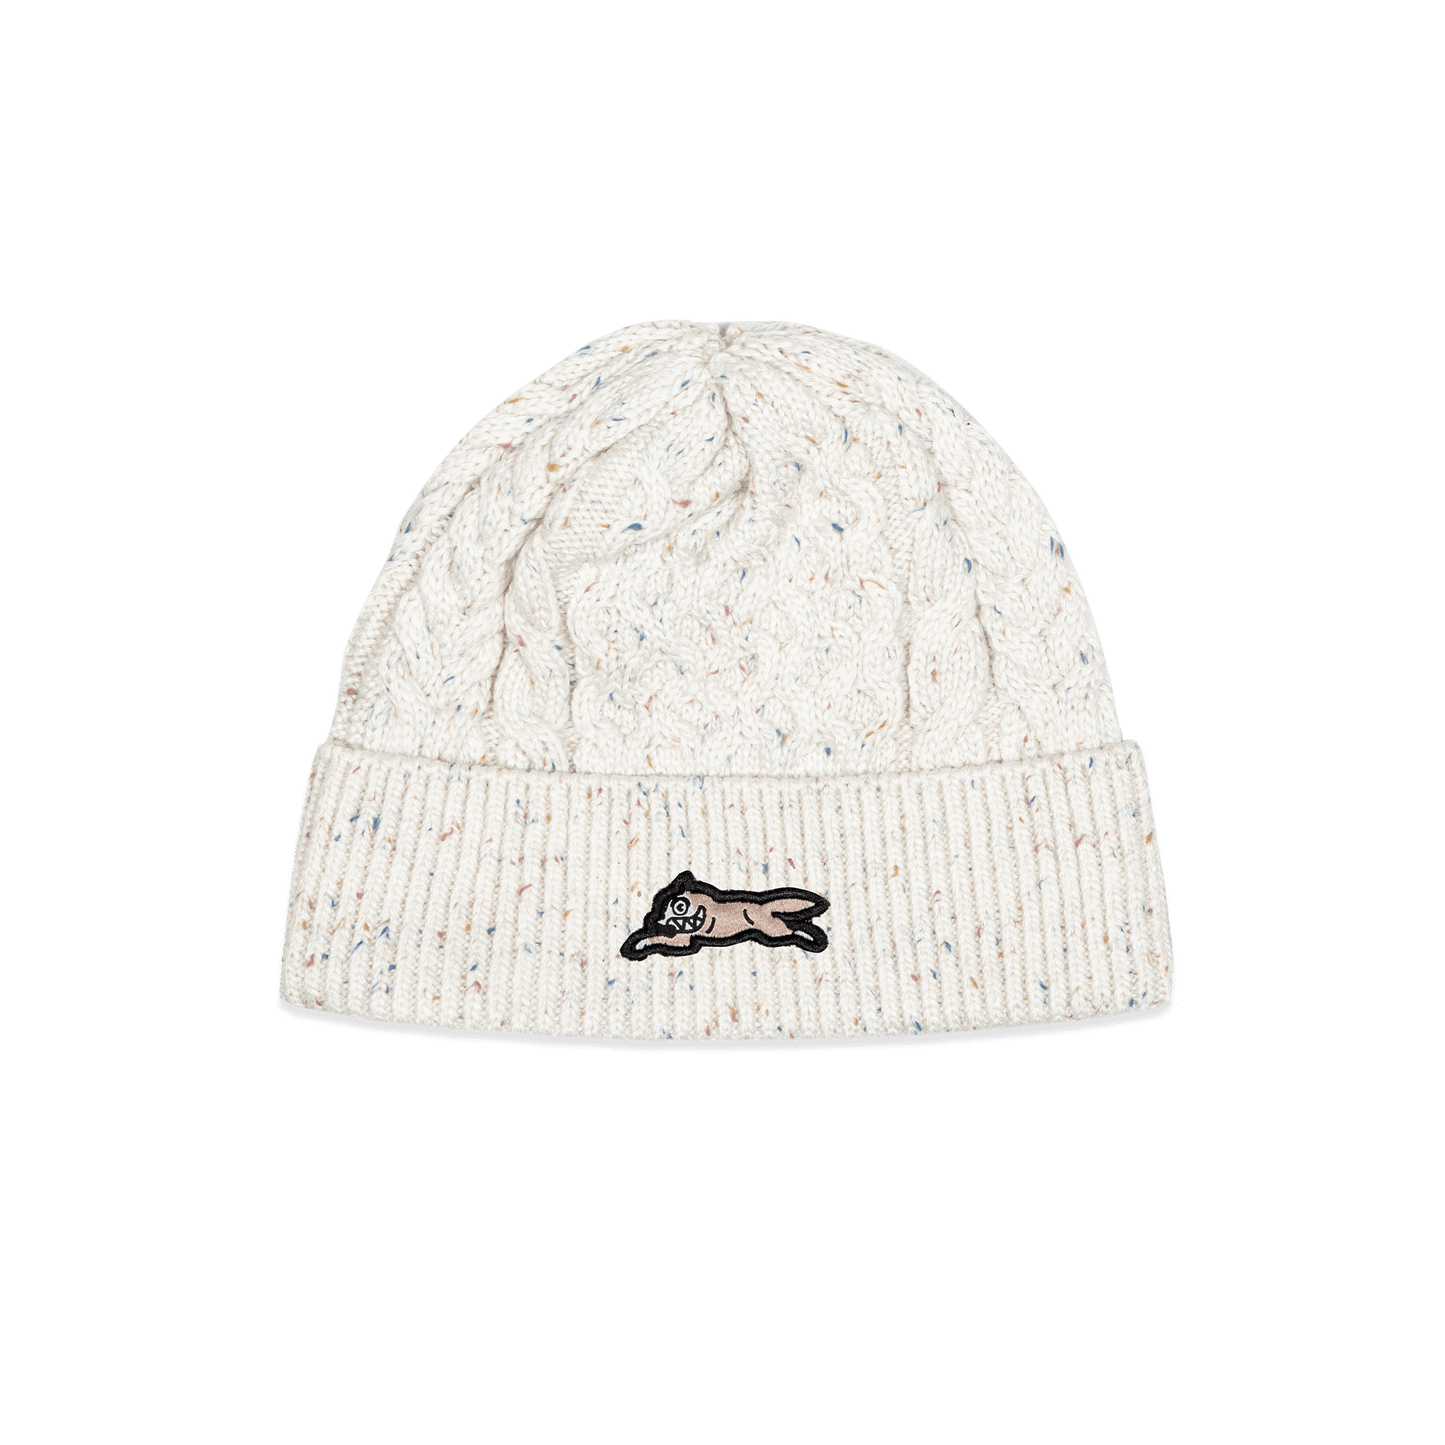 CABLE KNIT HAT - Icecream